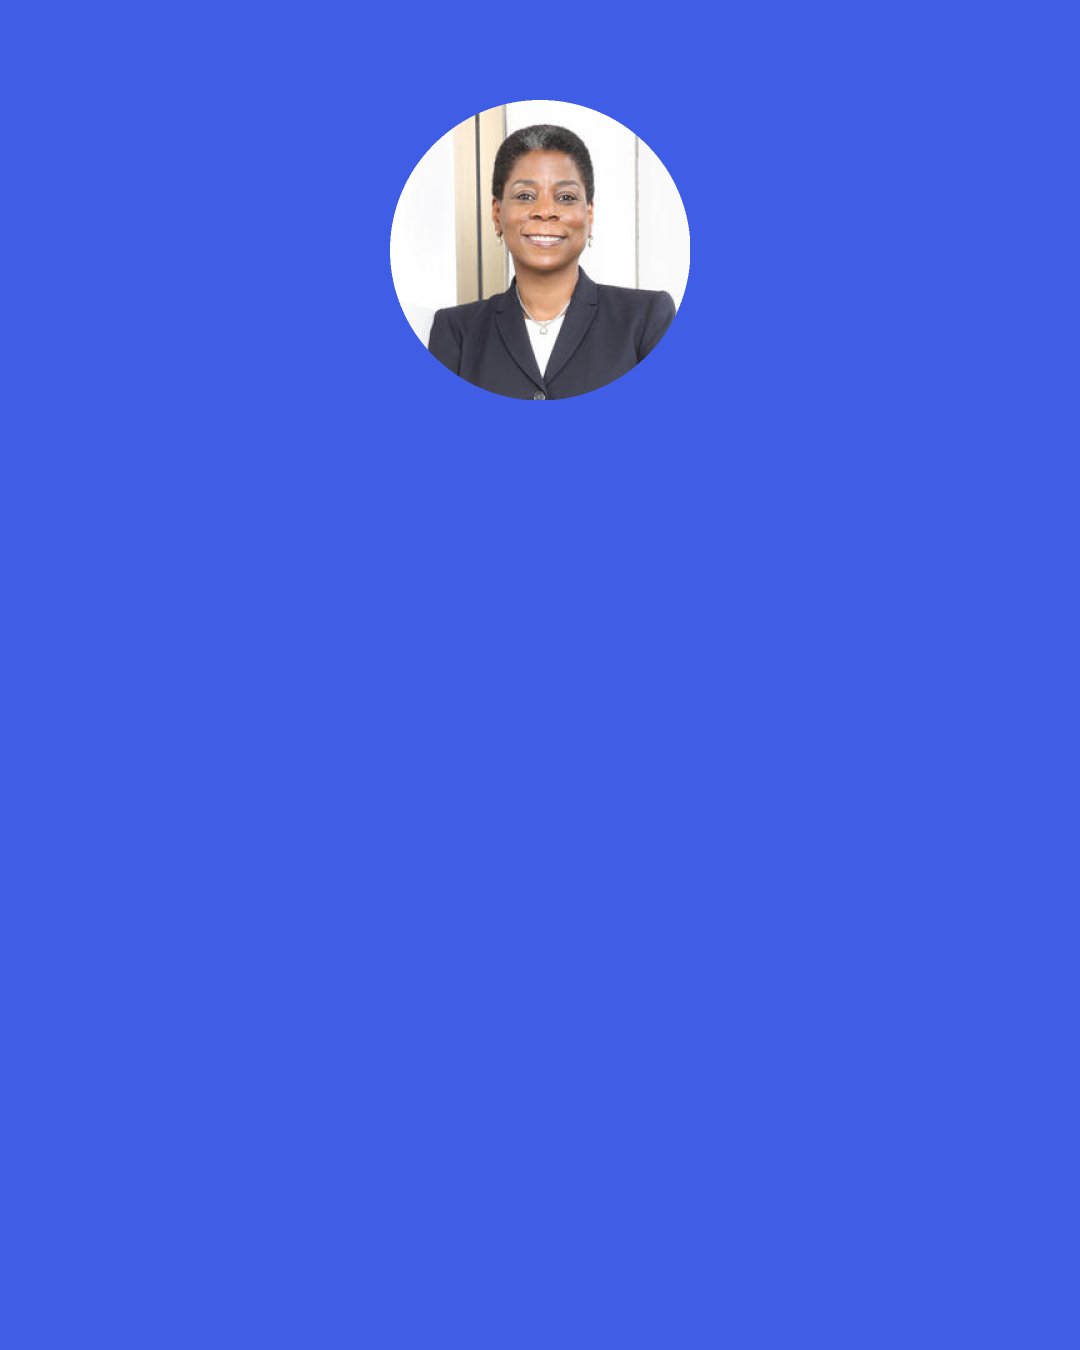 Ursula Burns: As Ive progressed in my career, Ive come to appreciate -- and really value -- the other attributes that define a companys success beyond the P&L: great leadership, long-term financial strength, ethical business practices, evolving business strategies, sound governance, powerful brands, values-based decision-making.